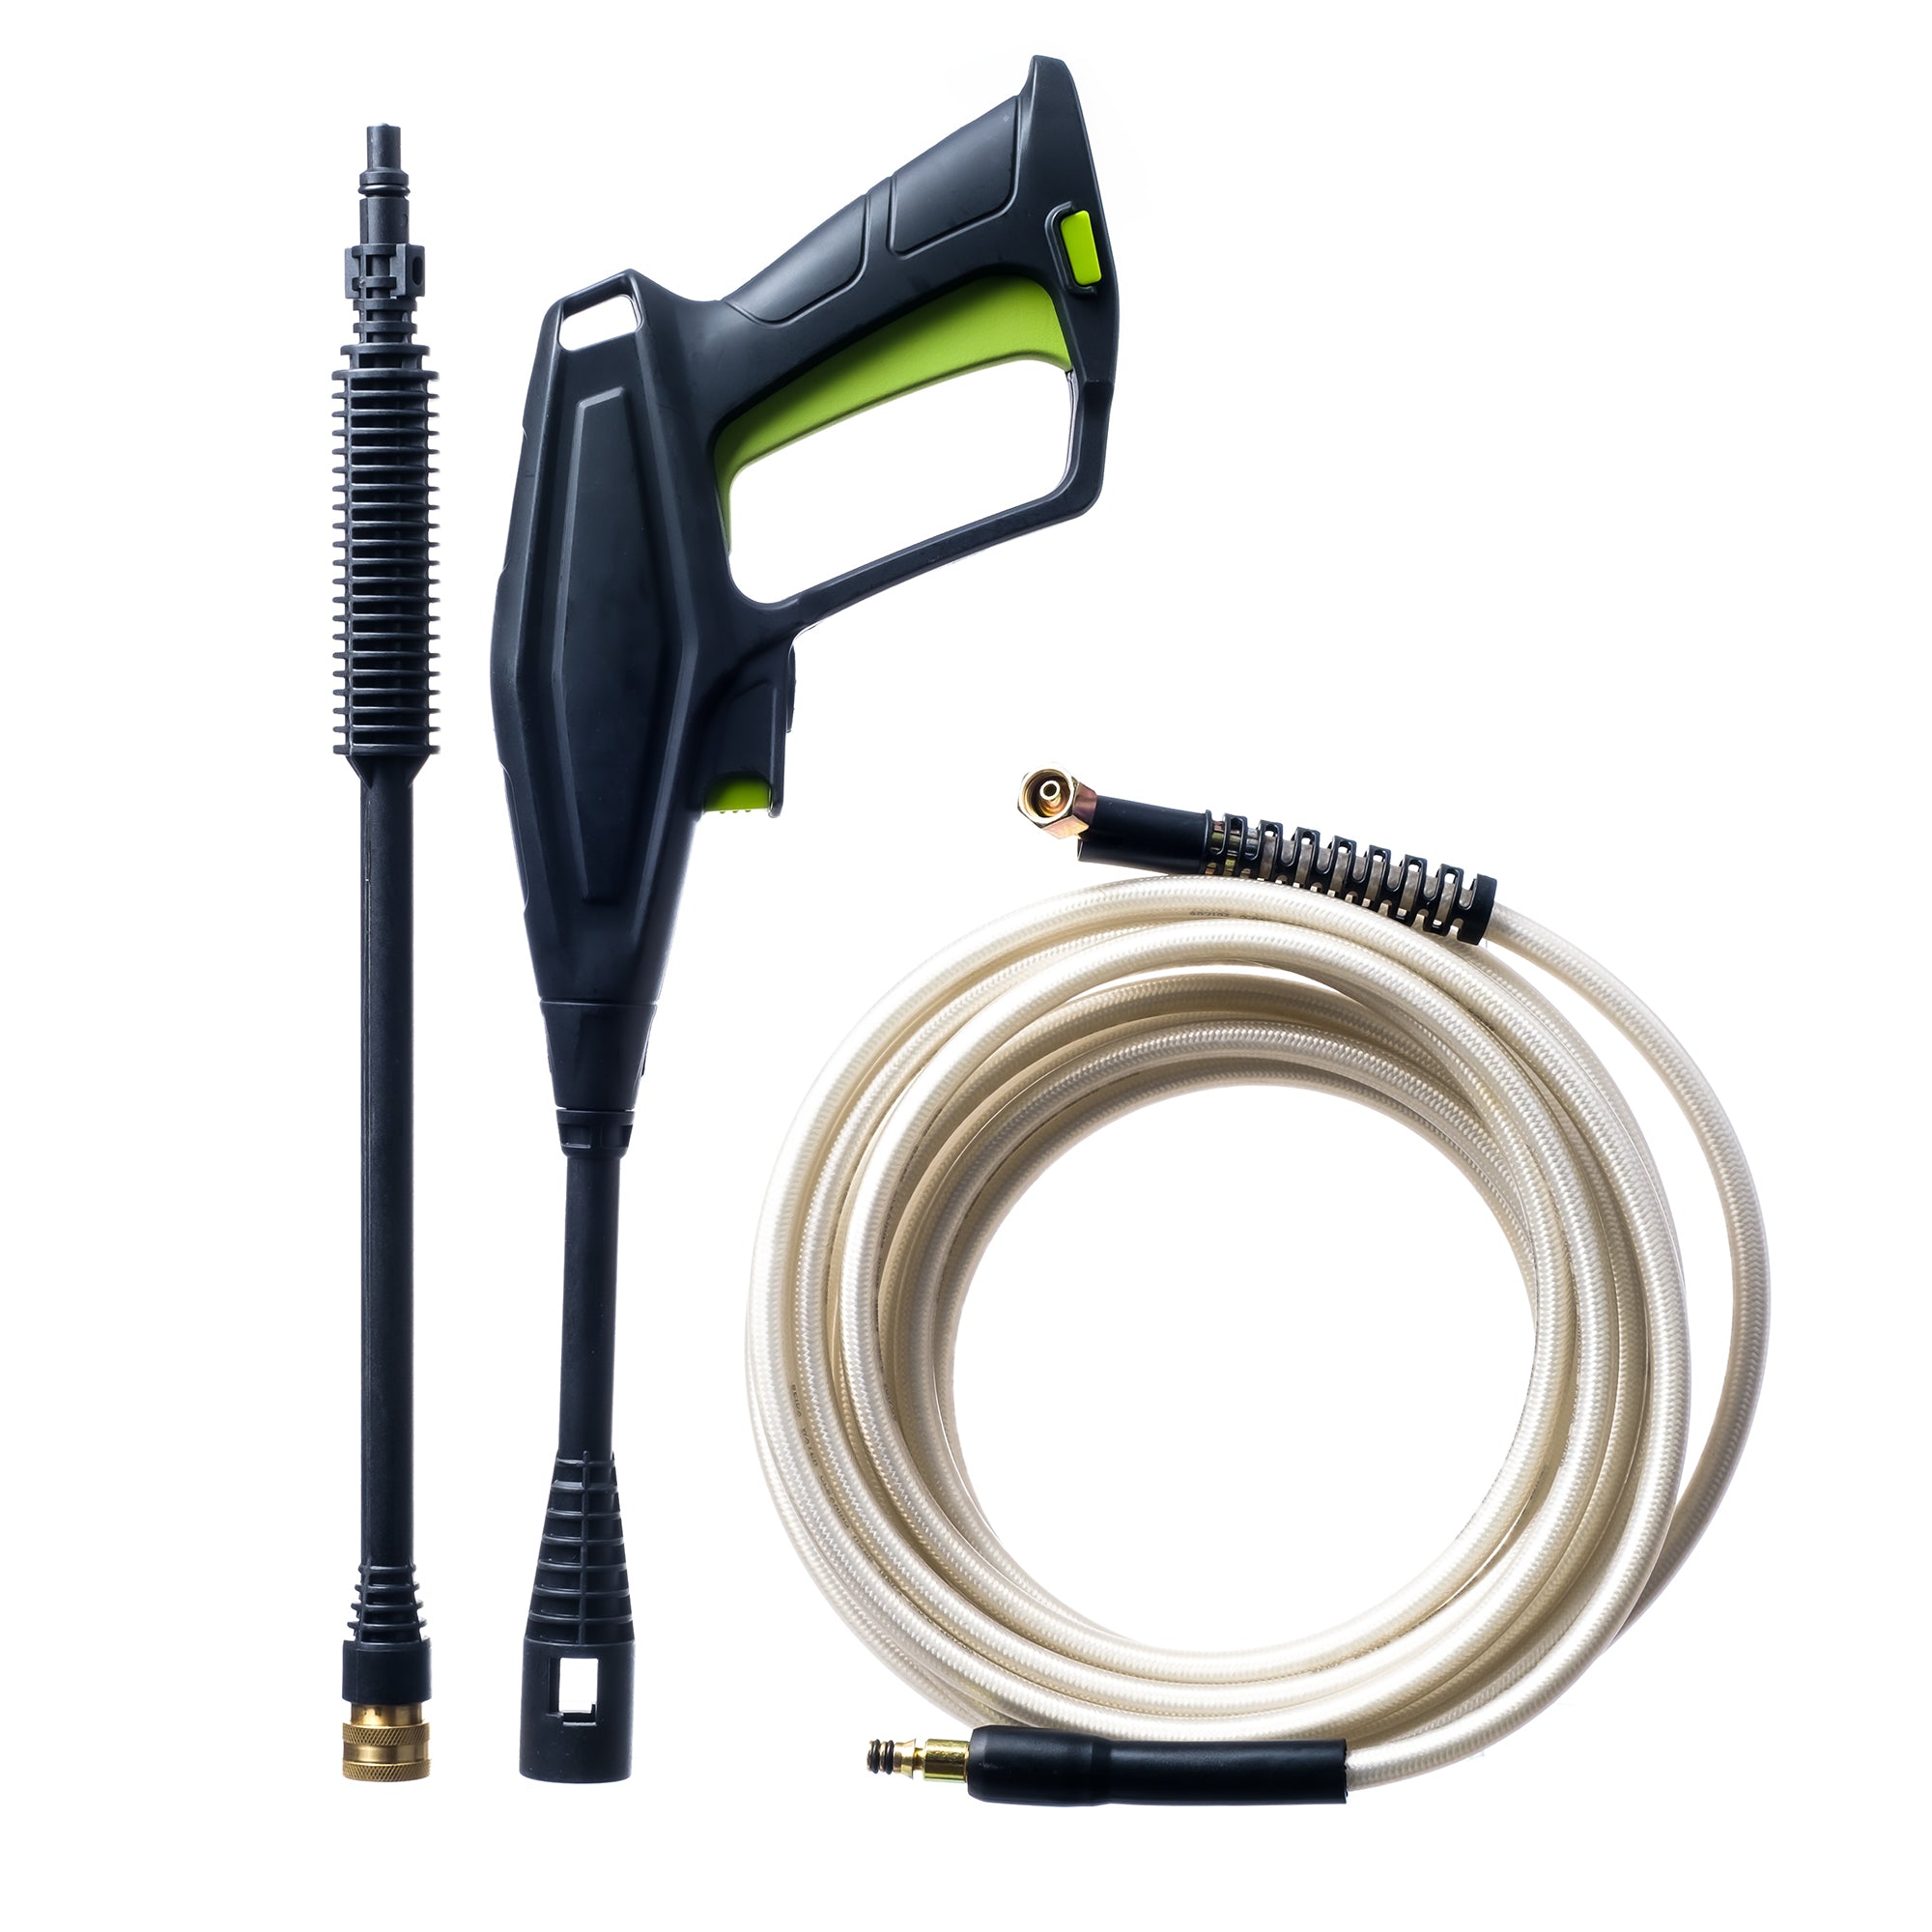 Pressure Hose, Gun, and Lance FOR MODELS PW18503 & PW20003FS CONSISTING OF  FB619-02-27 HOSE, FQ-7 GUN HANDLE, AND FQ-7B SPRAY LANCE., H.T.S.